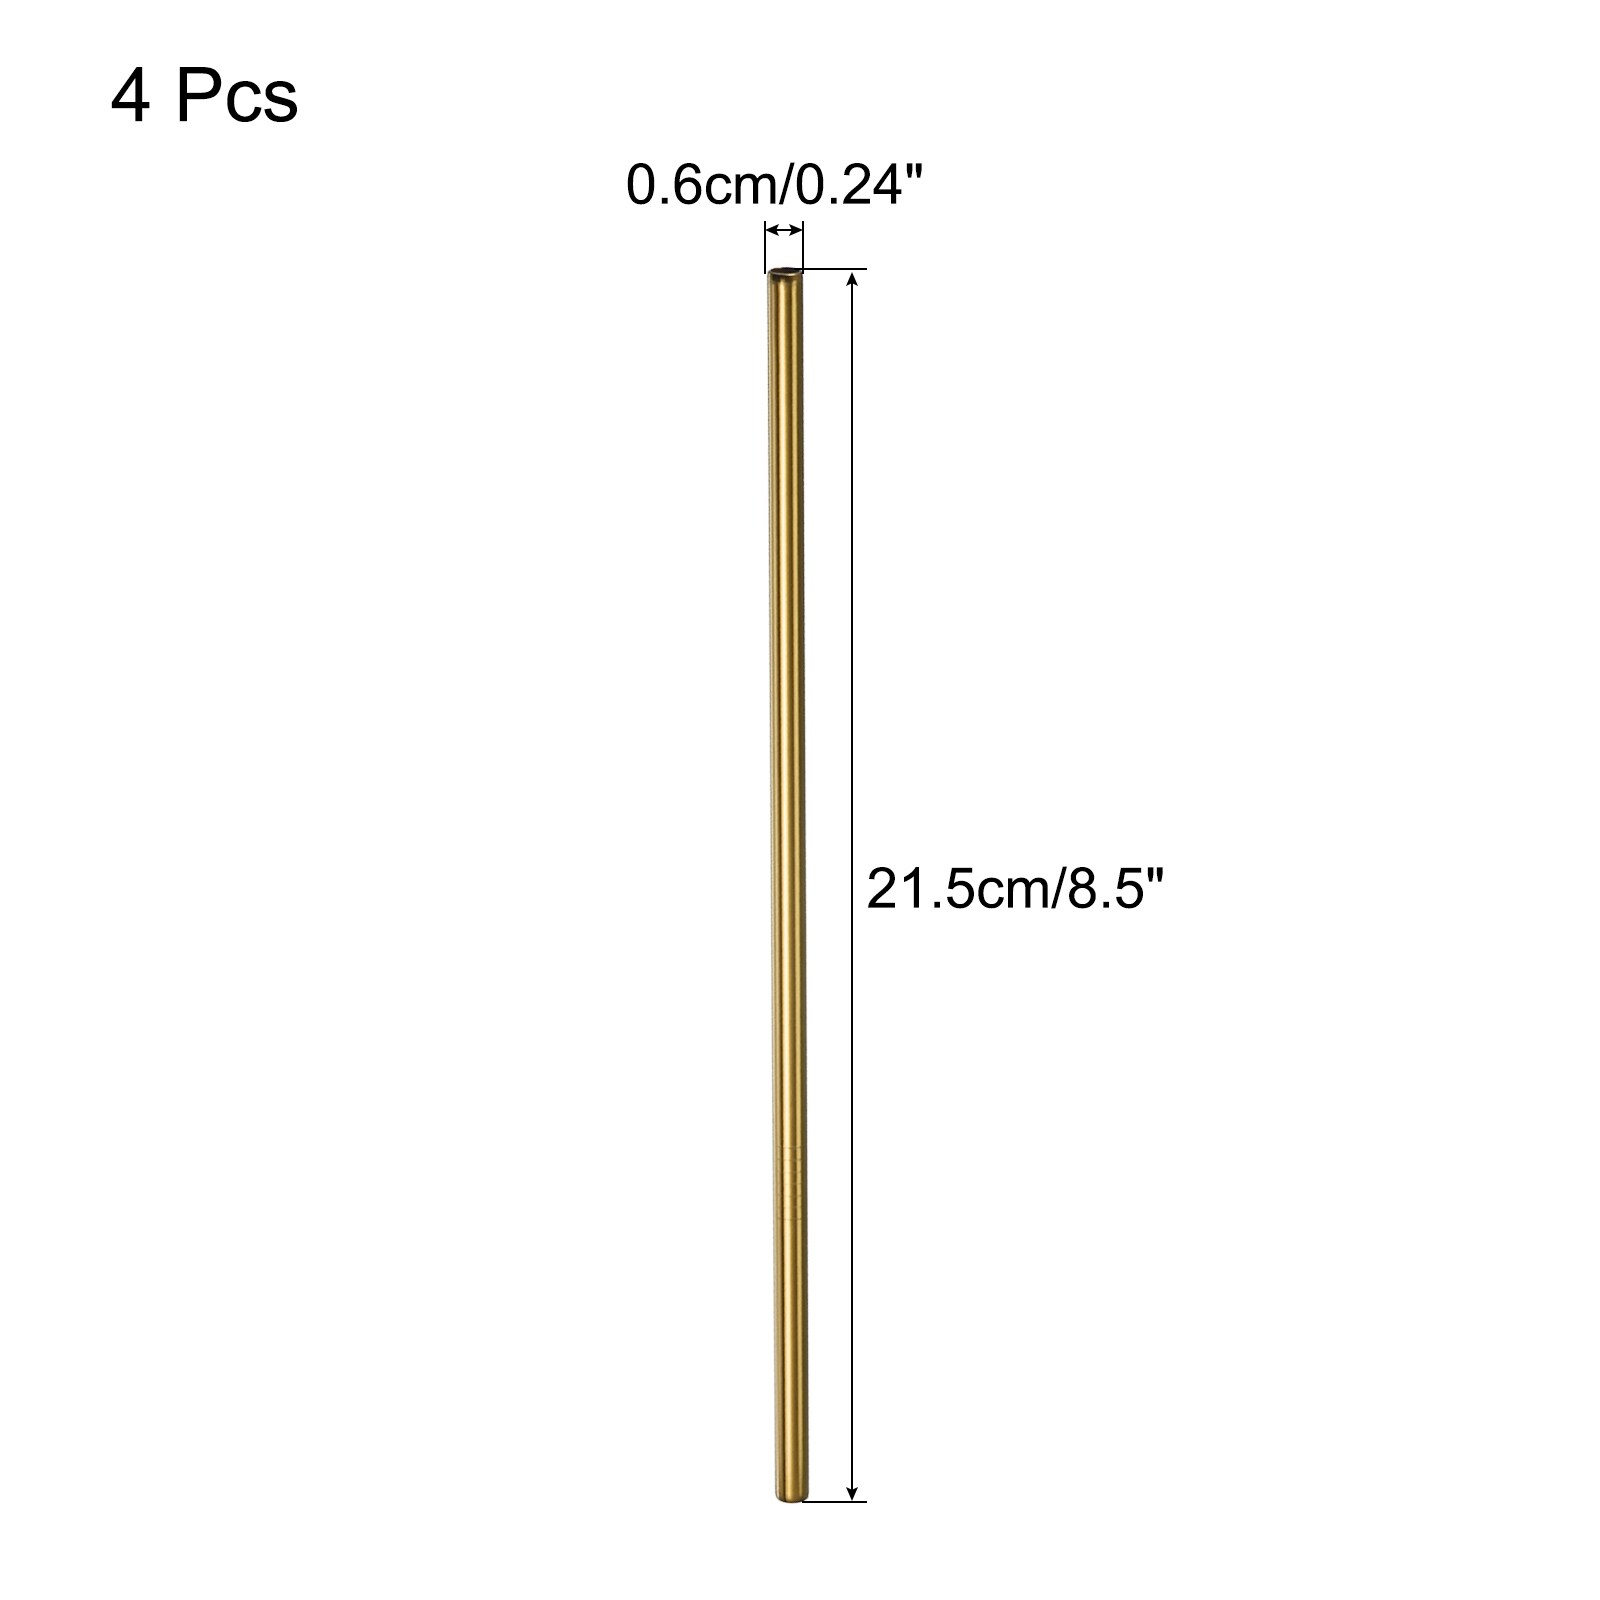 https://ak1.ostkcdn.com/images/products/is/images/direct/e9ca483ab533667aeea031b820a1d858315dd21d/Reusable-Metal-Straws-4Pcs%2C-Stainless-Steel-Straight-Straw-8.5%22-Long.jpg